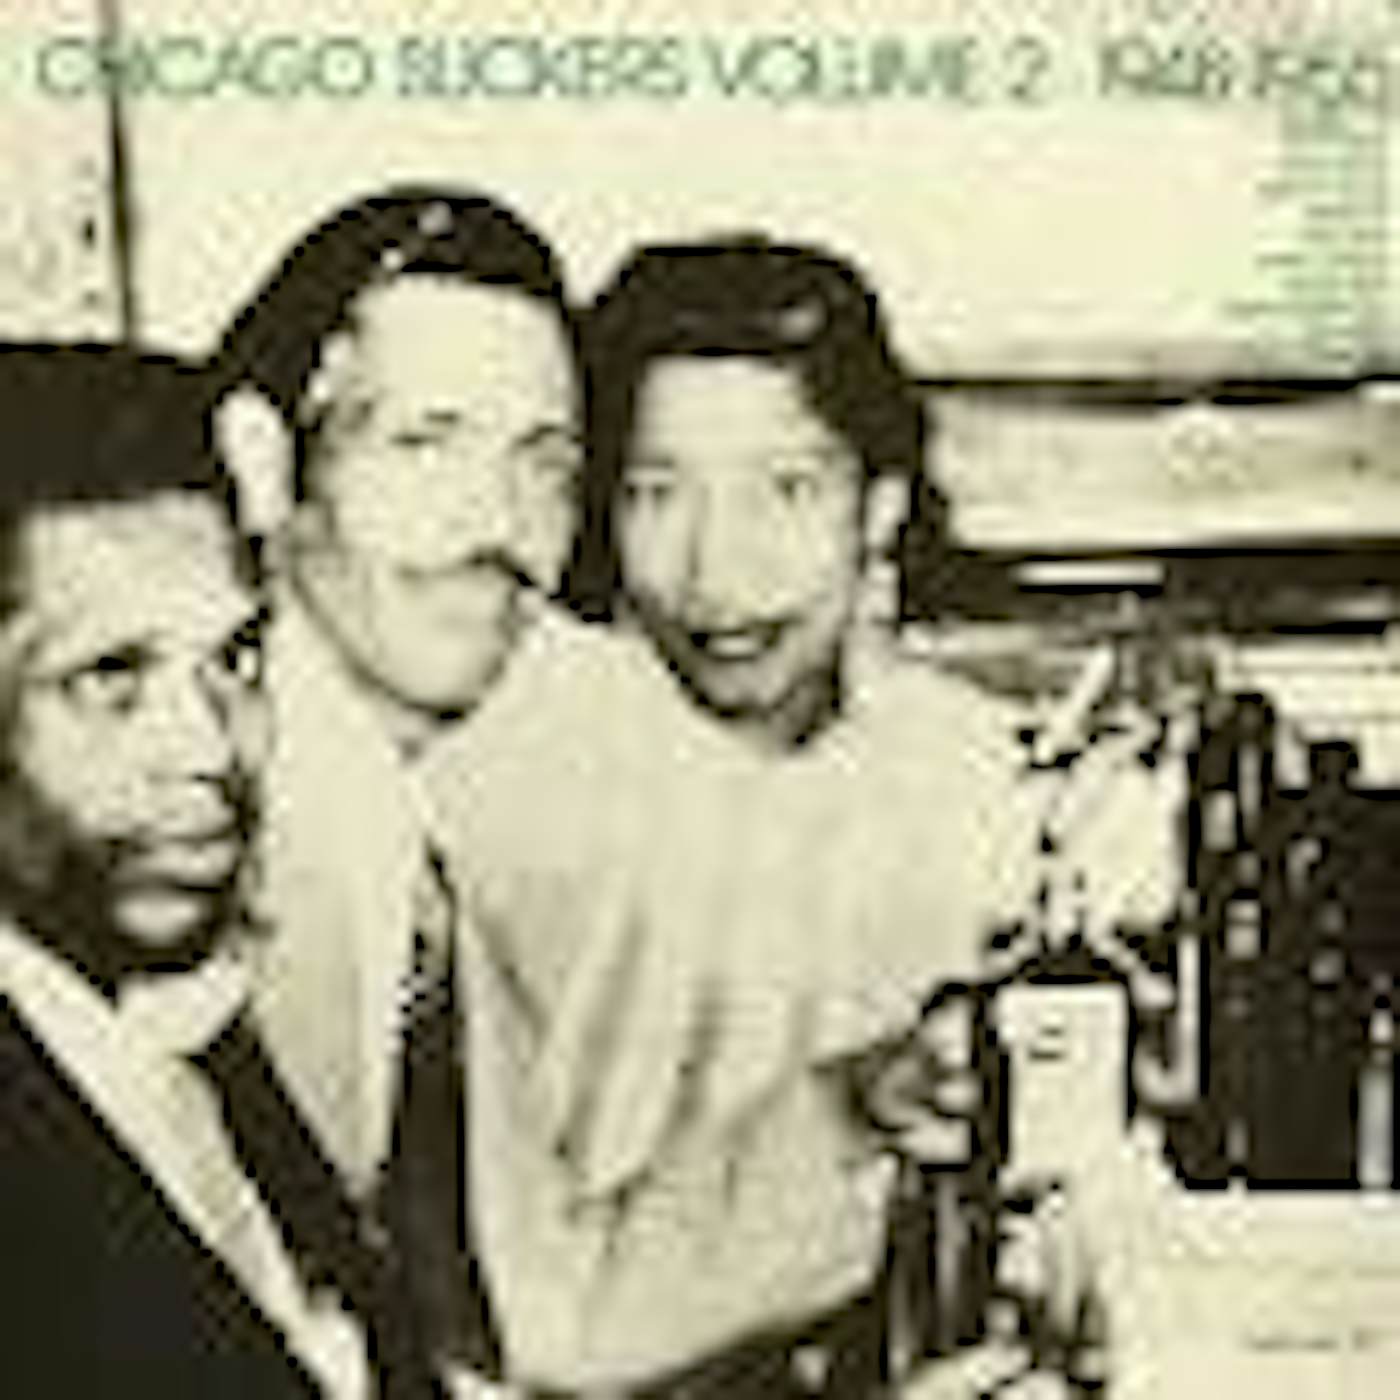 CHICAGO SLICKERS 1948-1953 / VARIOUS CD